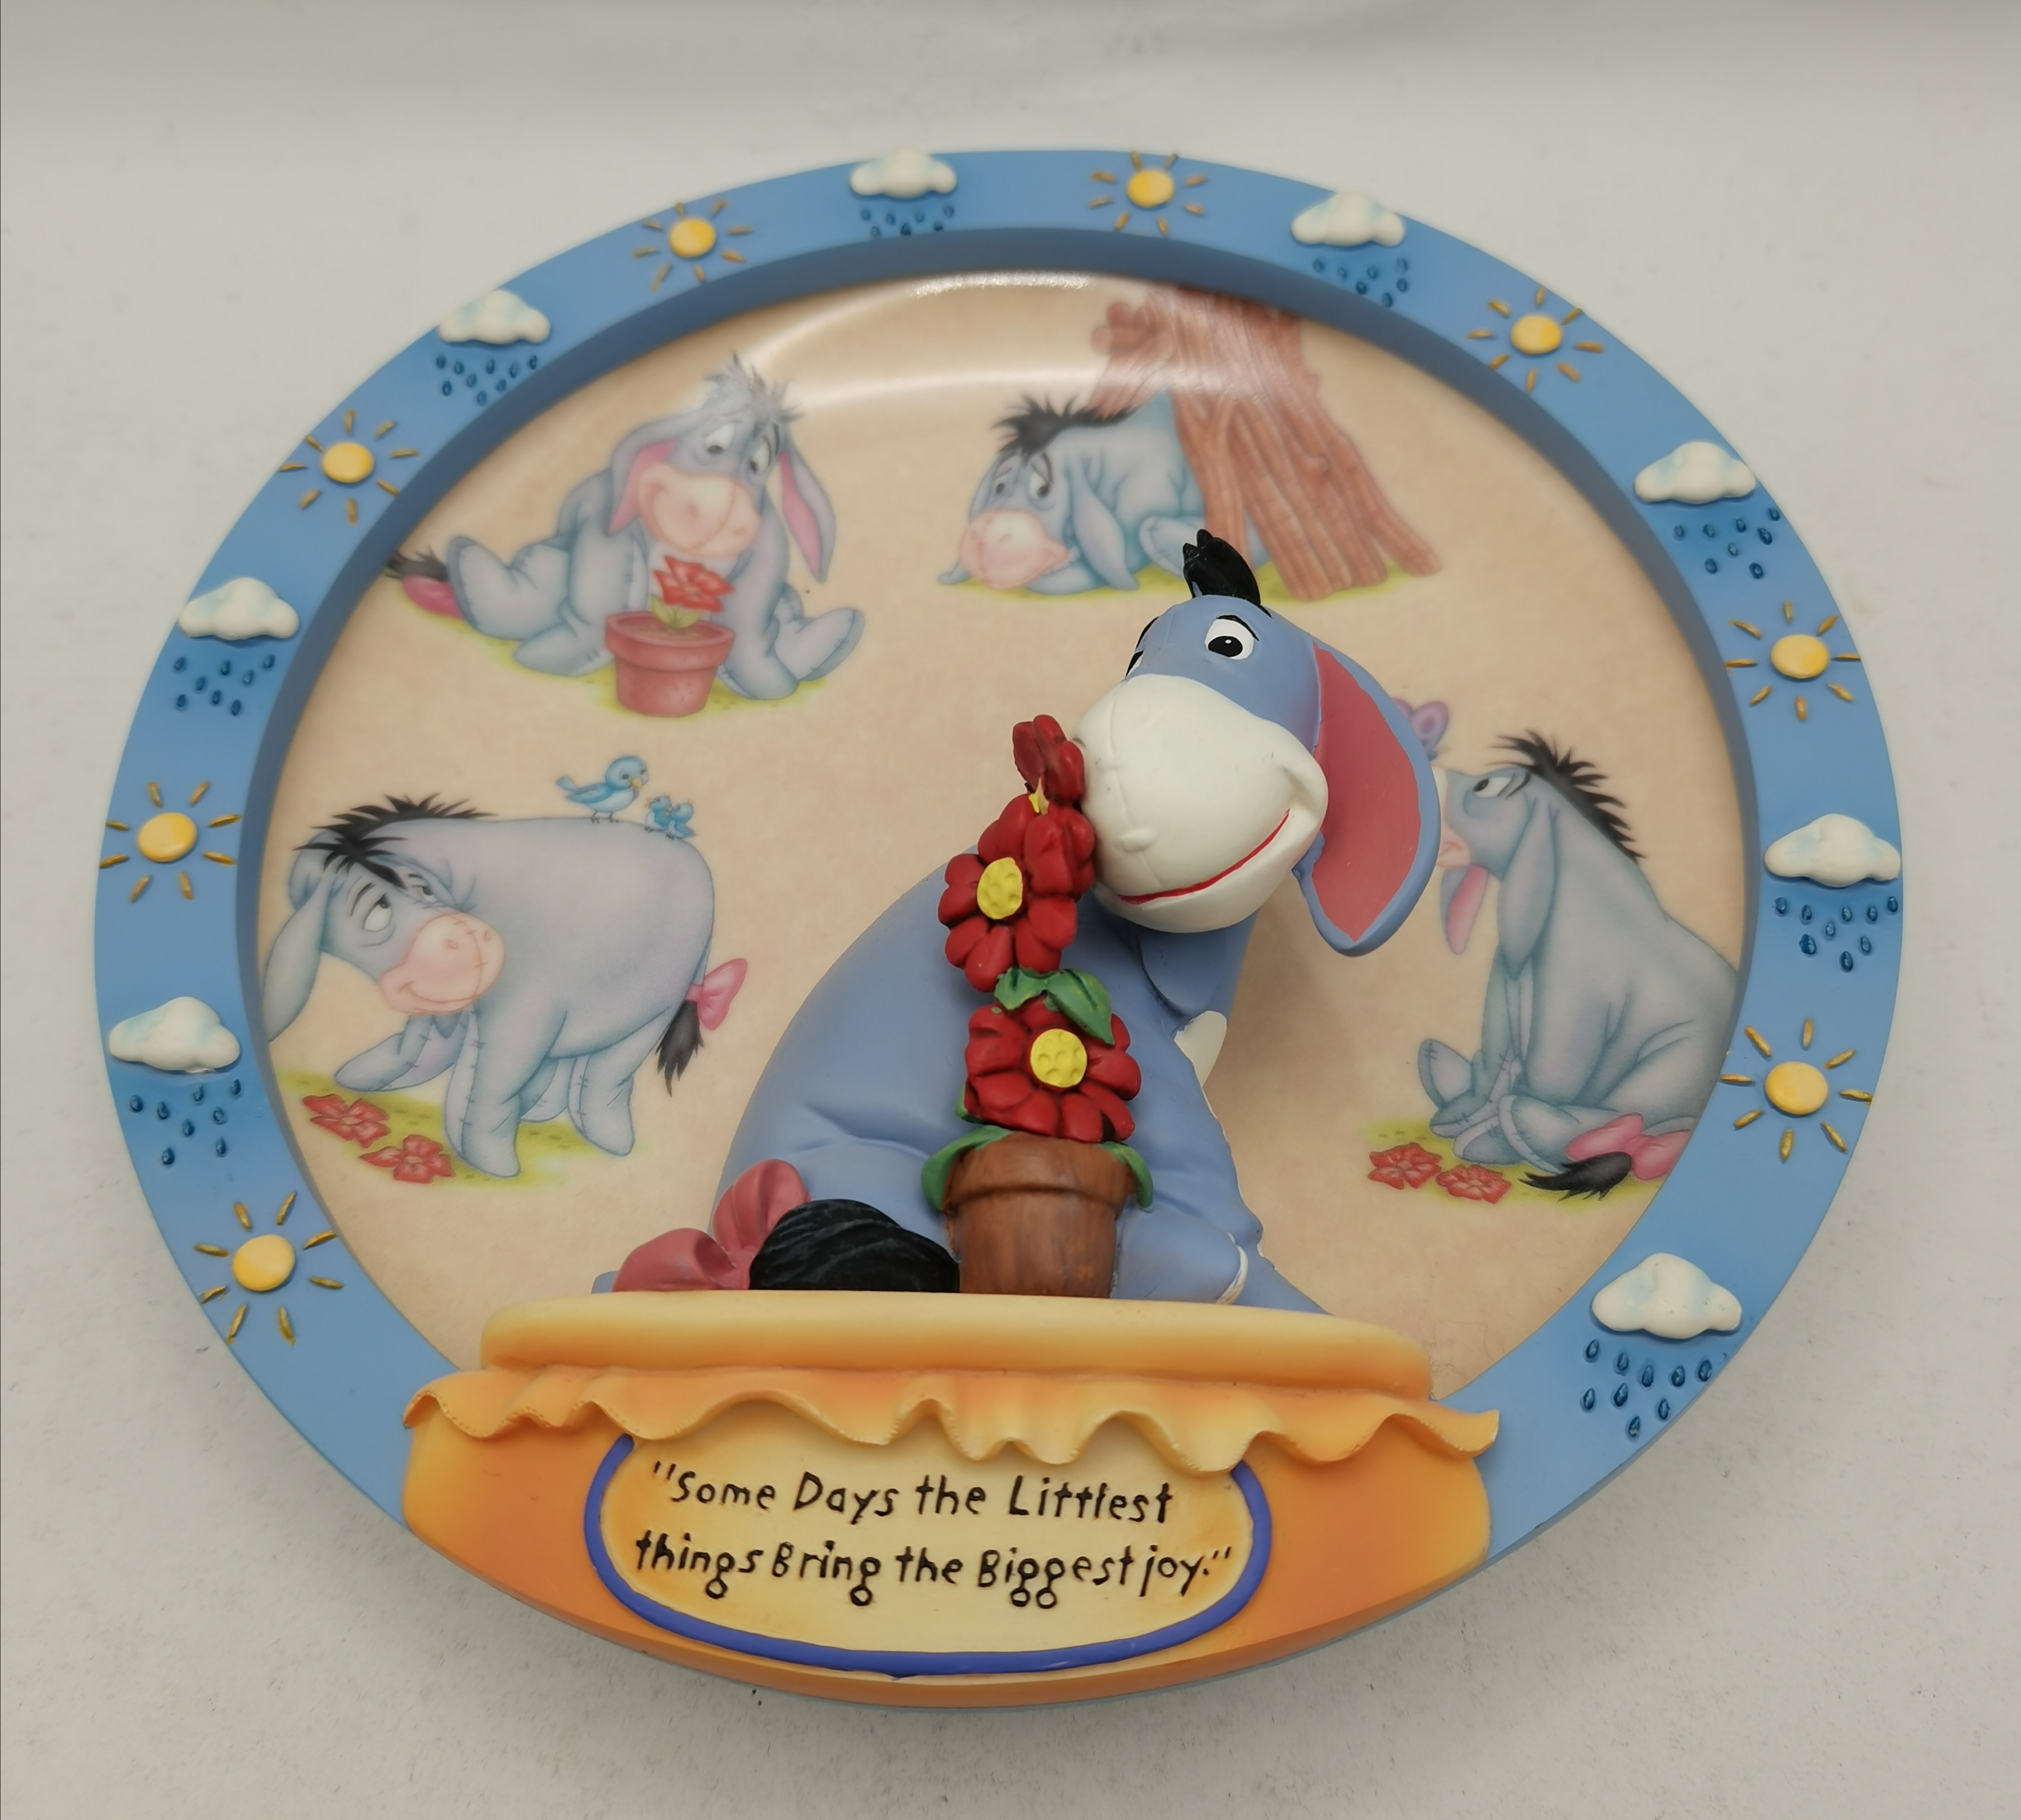 x5 Limited Edition Disney Plates with certificates and boxes - Image 2 of 8